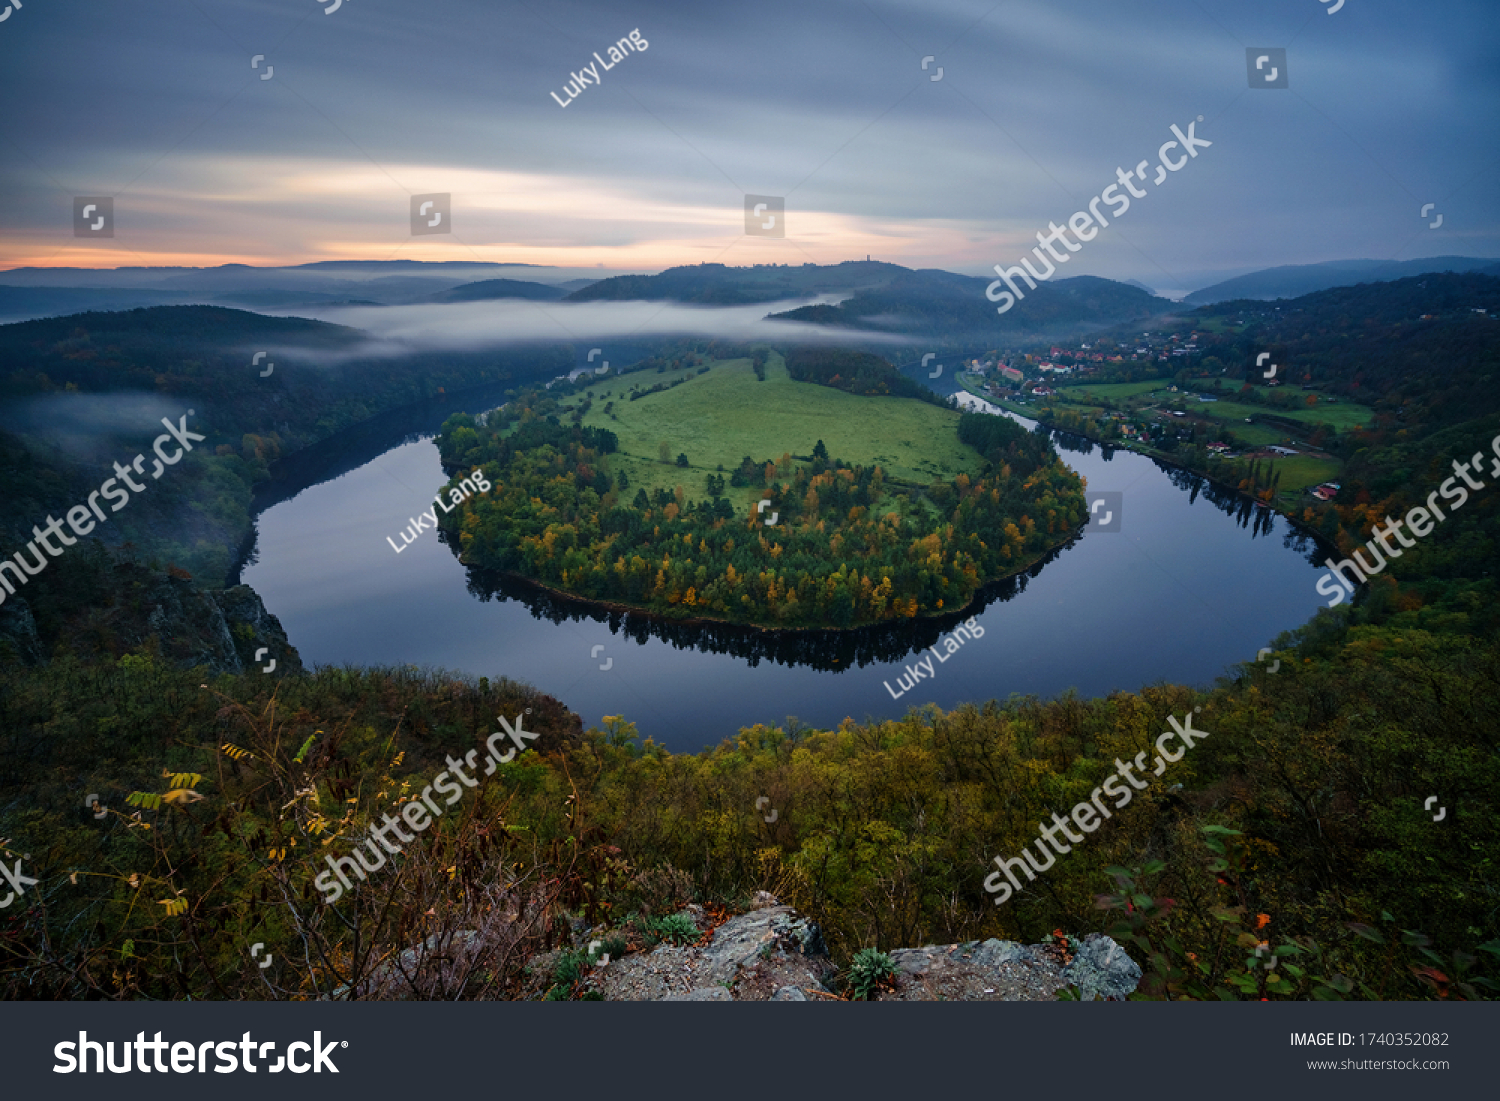 6,313 Must see places Images, Stock Photos & Vectors | Shutterstock